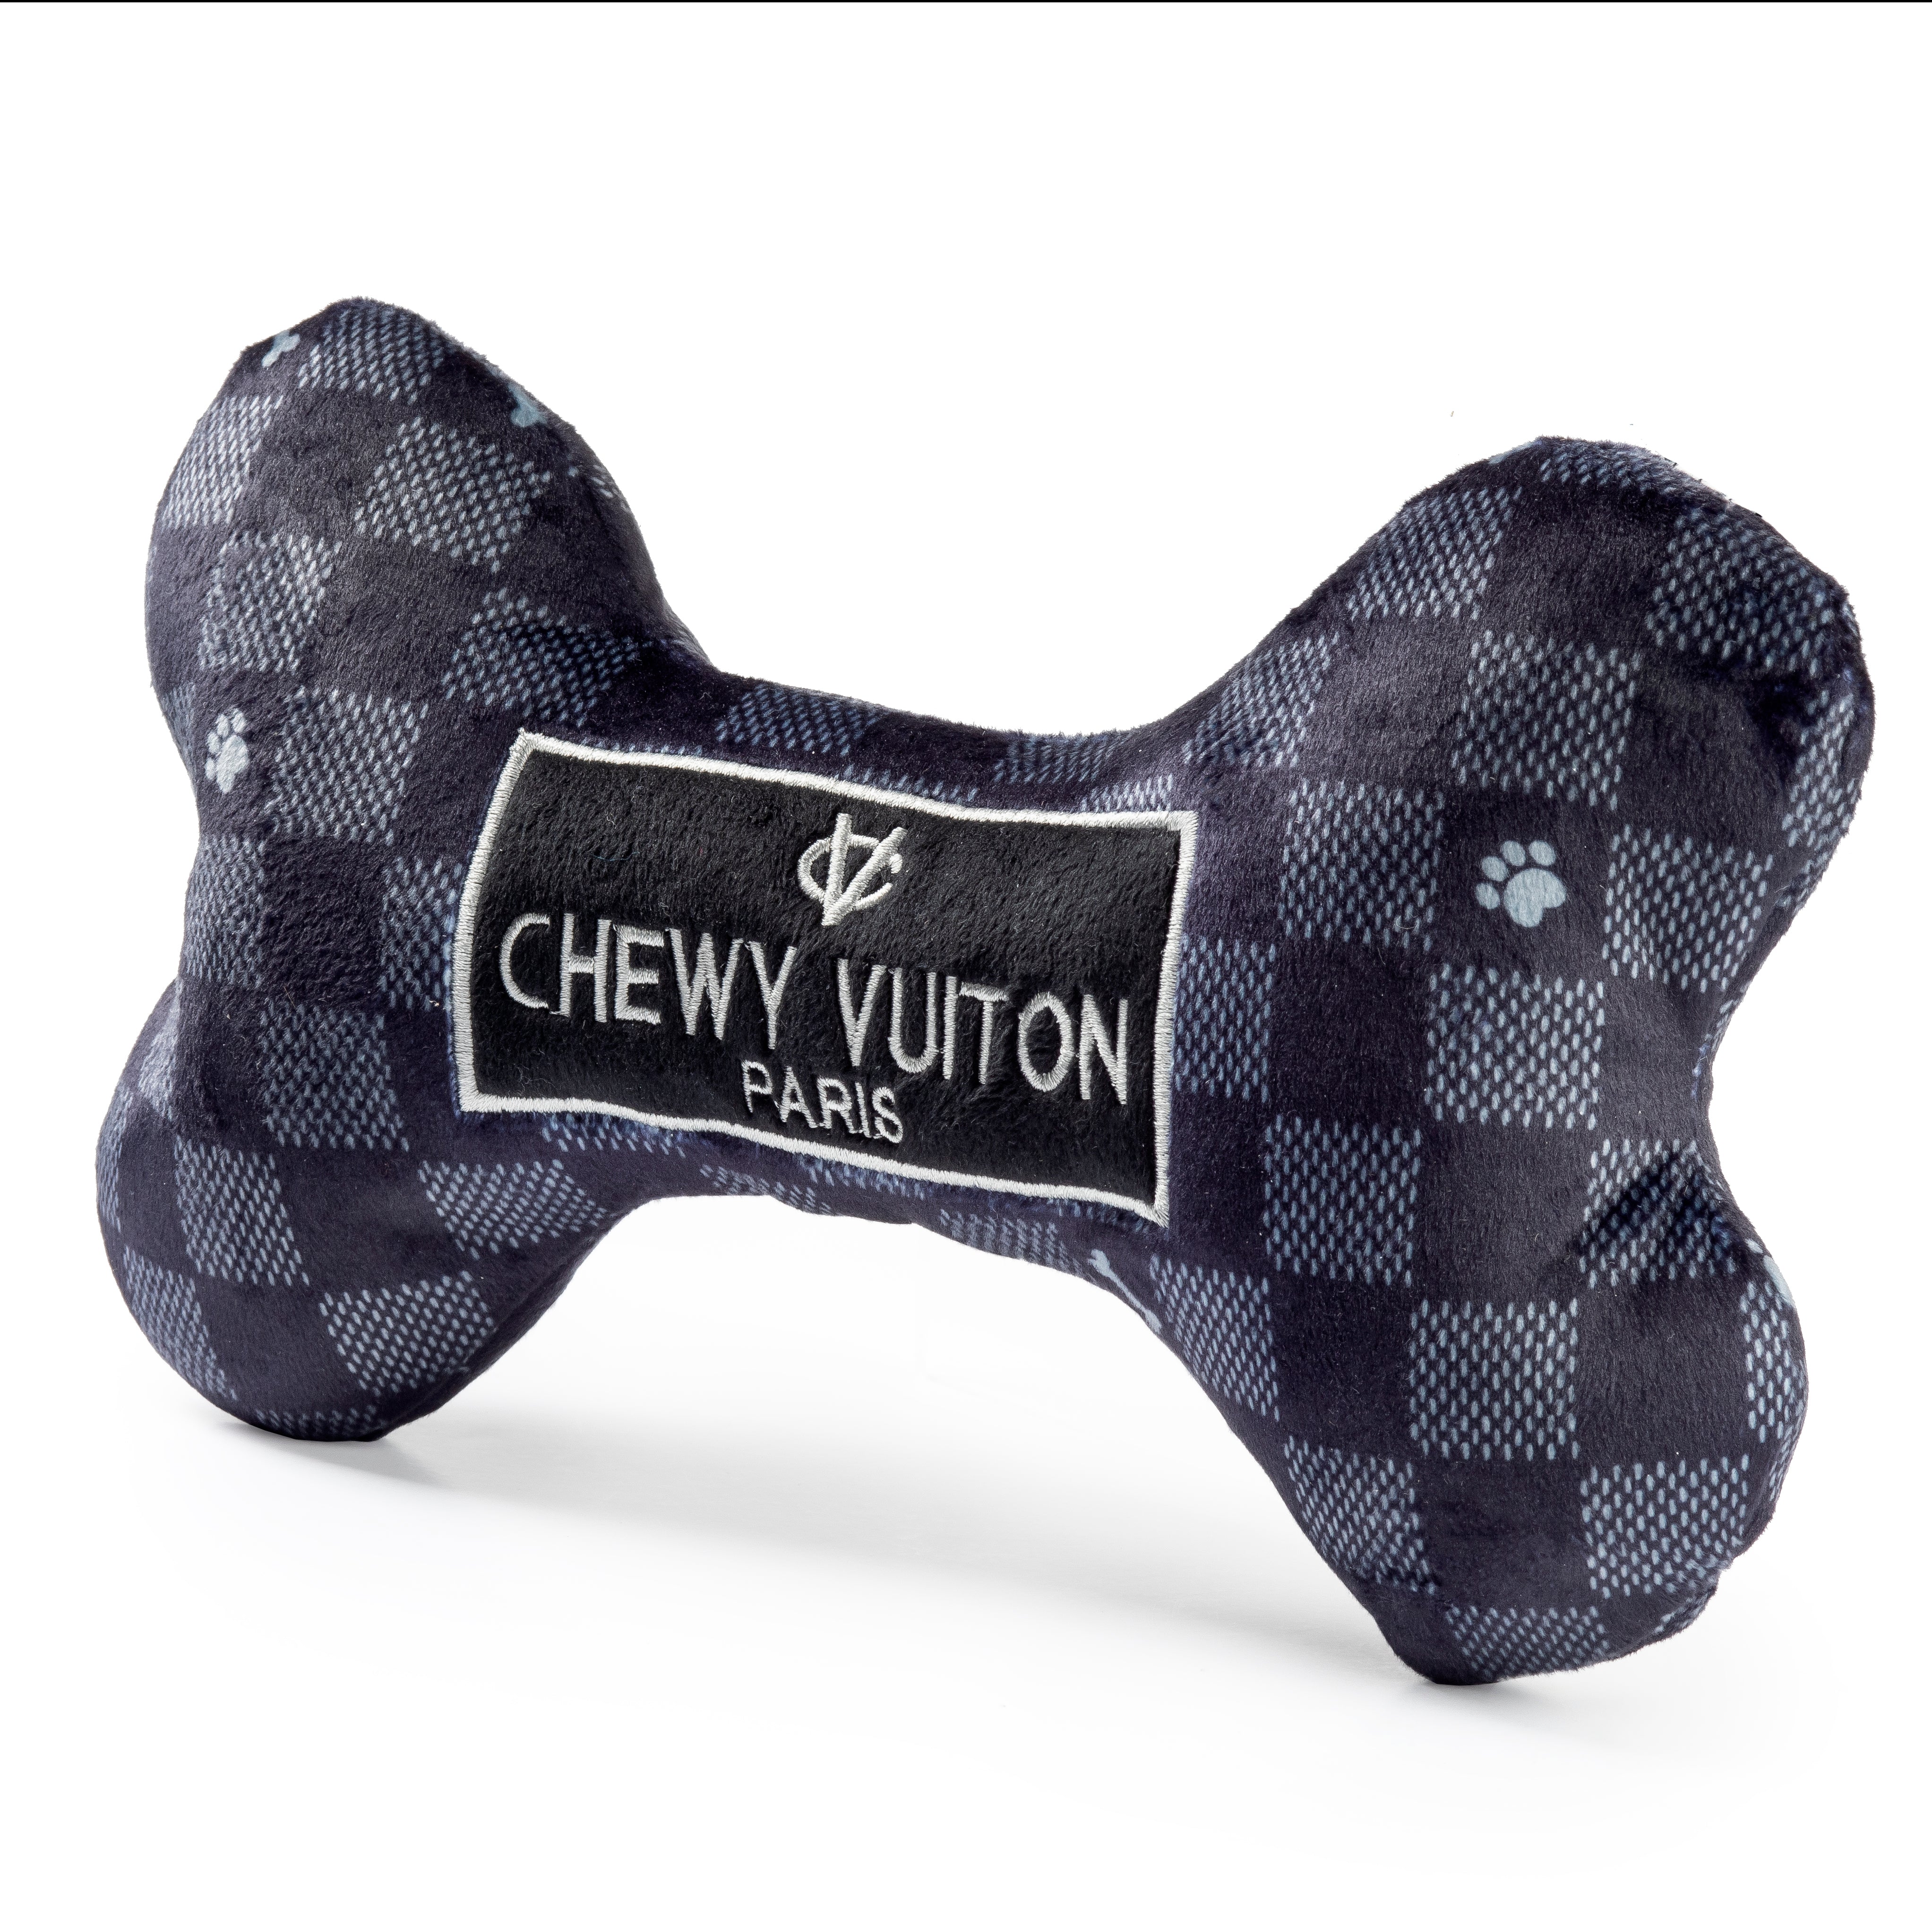 Haute Diggity Dog Chewy Vuiton White Bone Toy » Dogfather and Co.